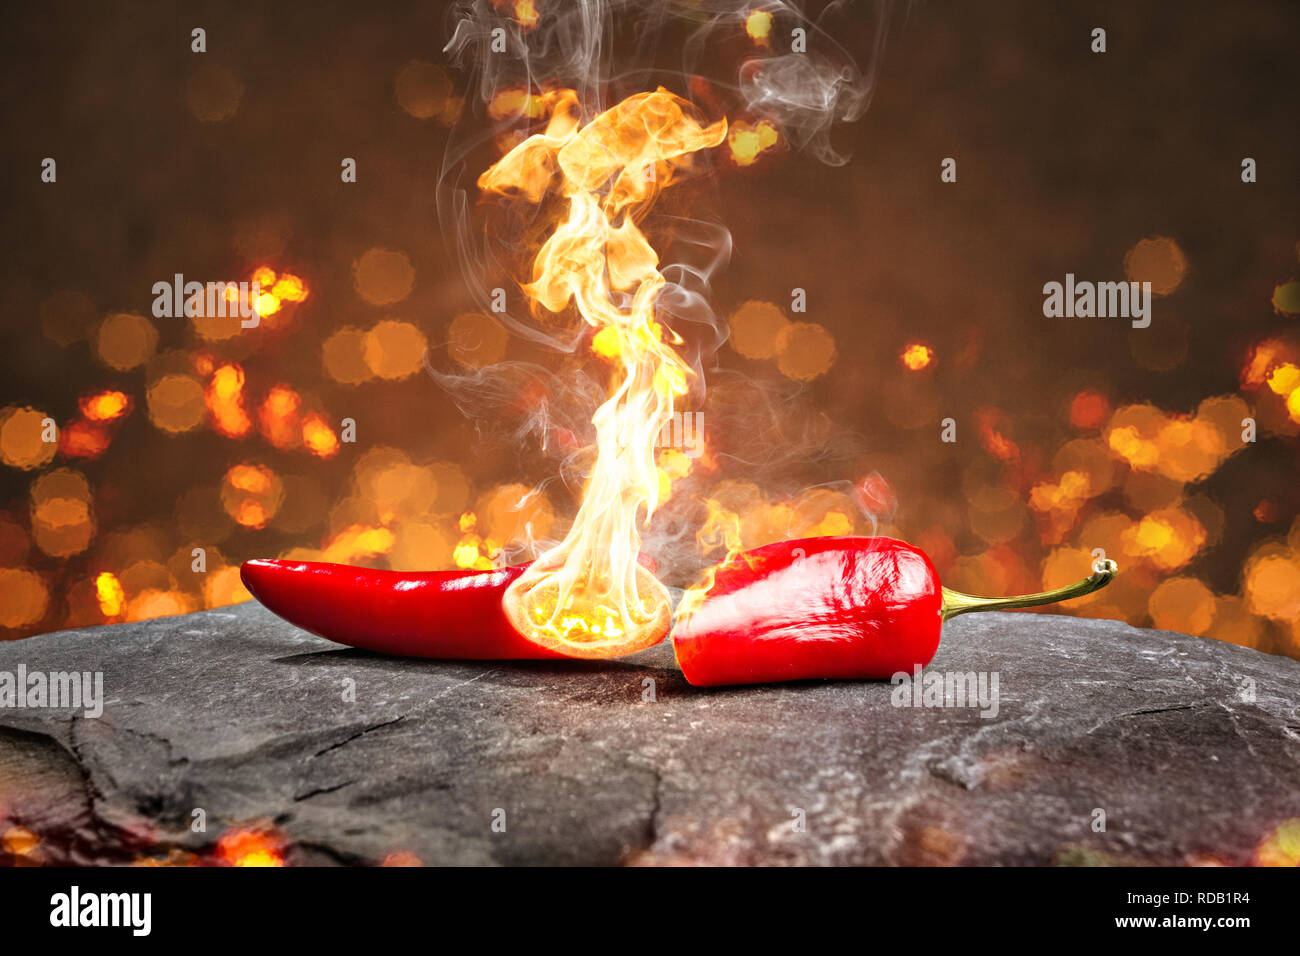 Burning hot chili pepper with a flame Stock Photo